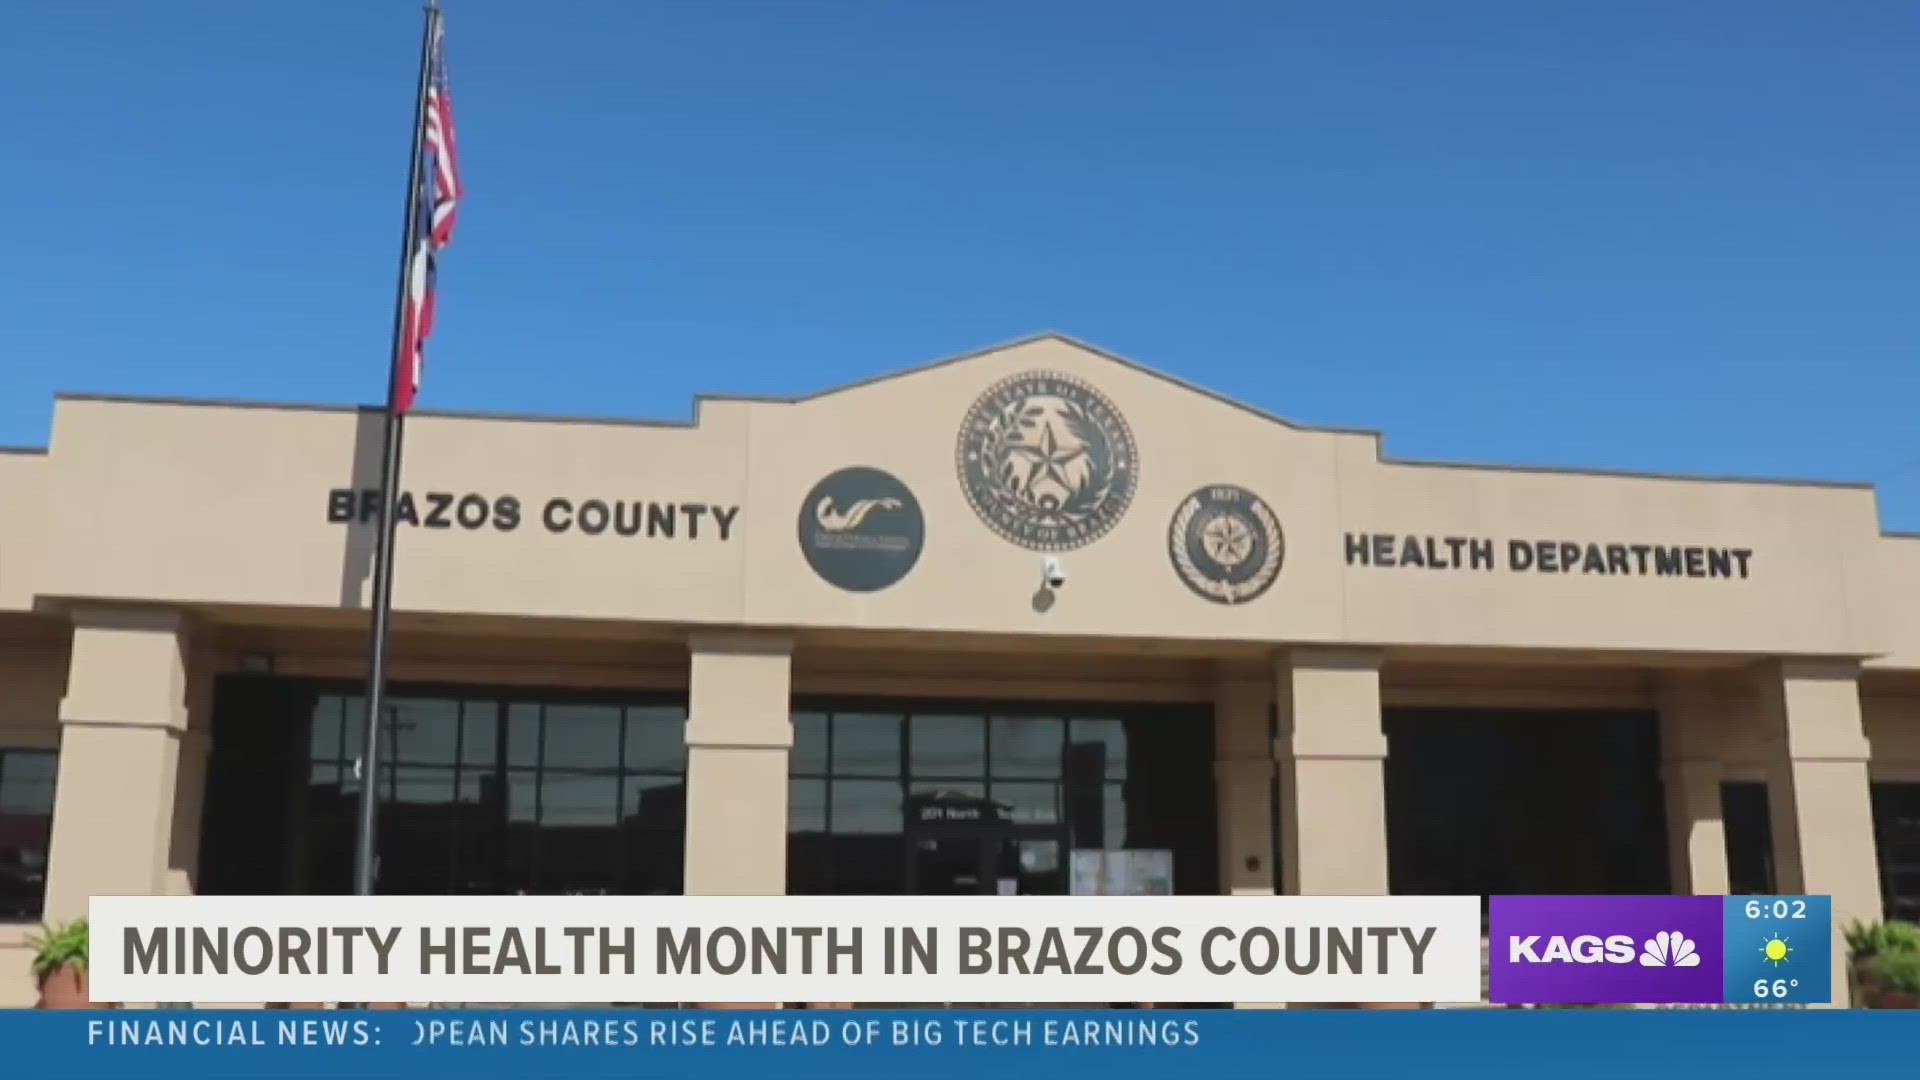 The Brazos County Health Department provides care to over 800 people a month, and at least 80% of that number is comprised of Spanish speakers.